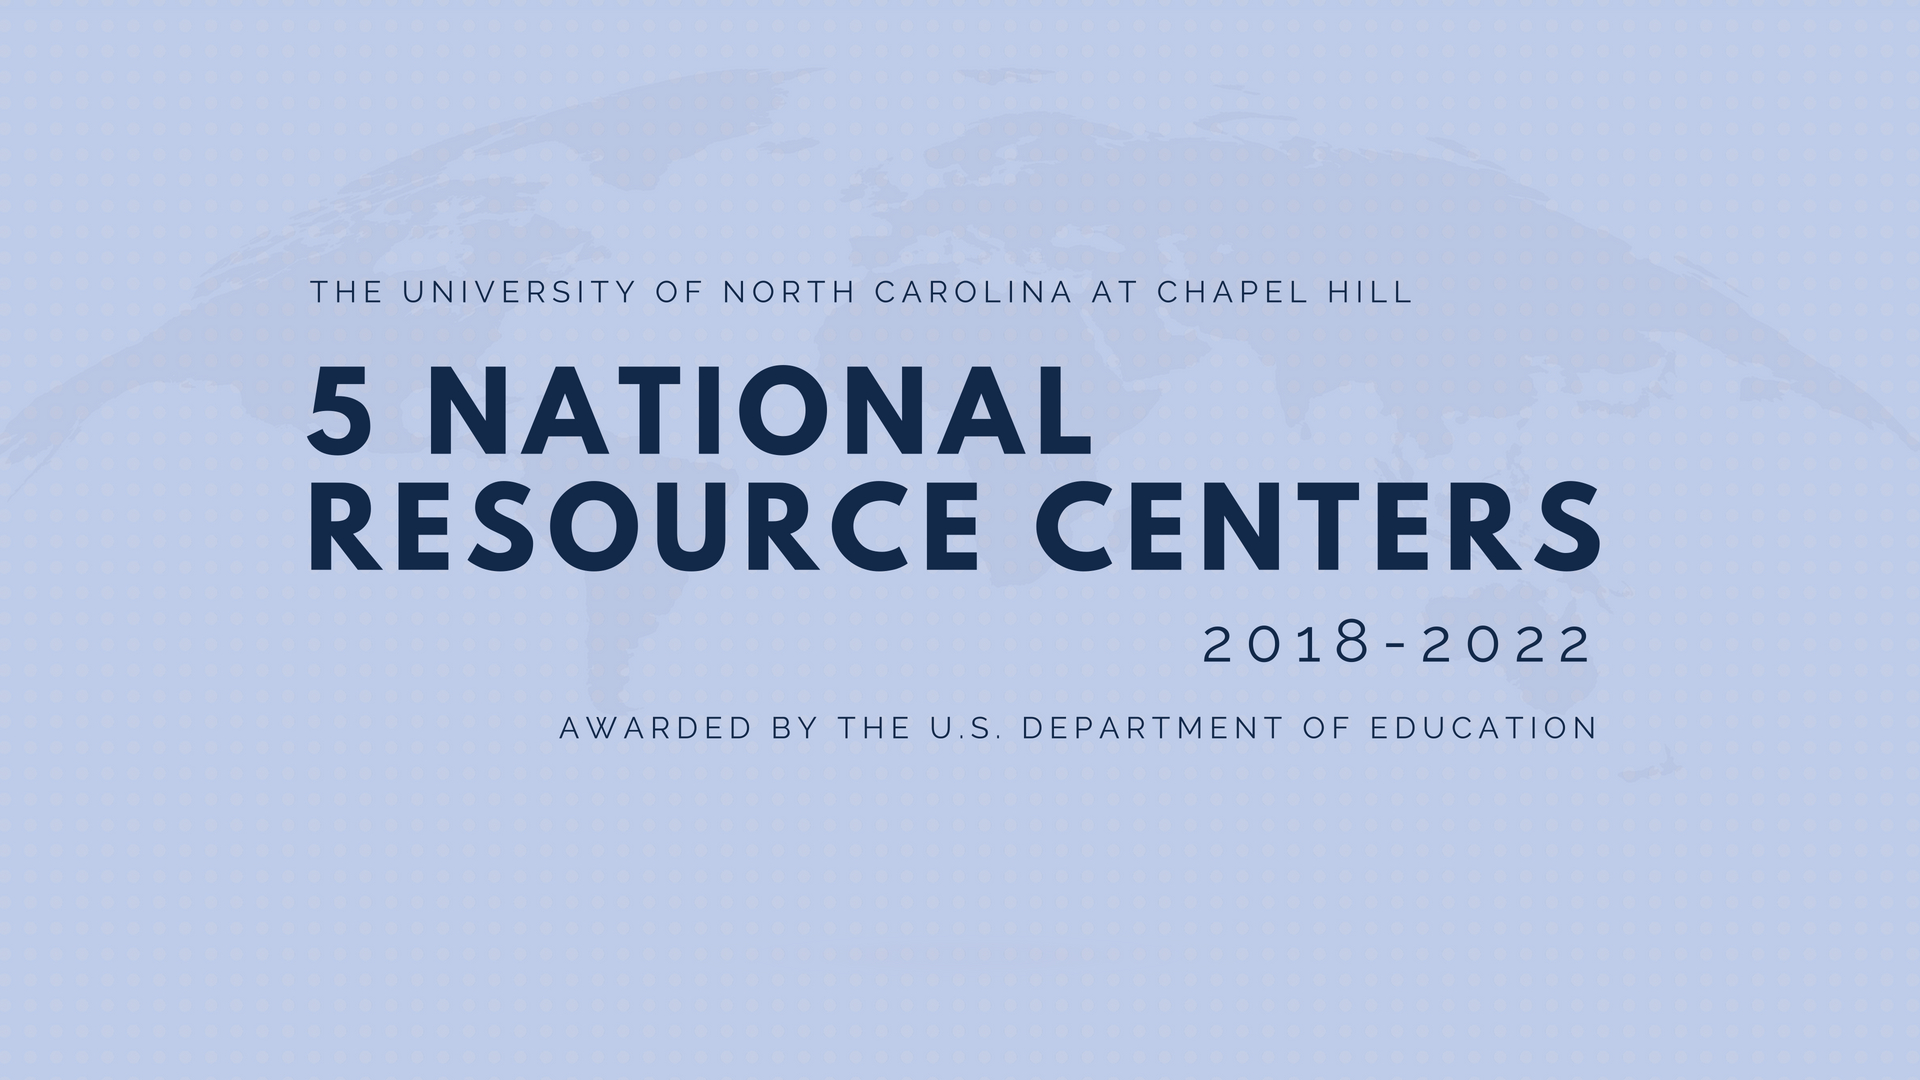 Text slide reads: The University of North Carolina at Chapel Hill: 5 National Resource Centers, 2018-2022, Awarded by the U.S. Department of Education"